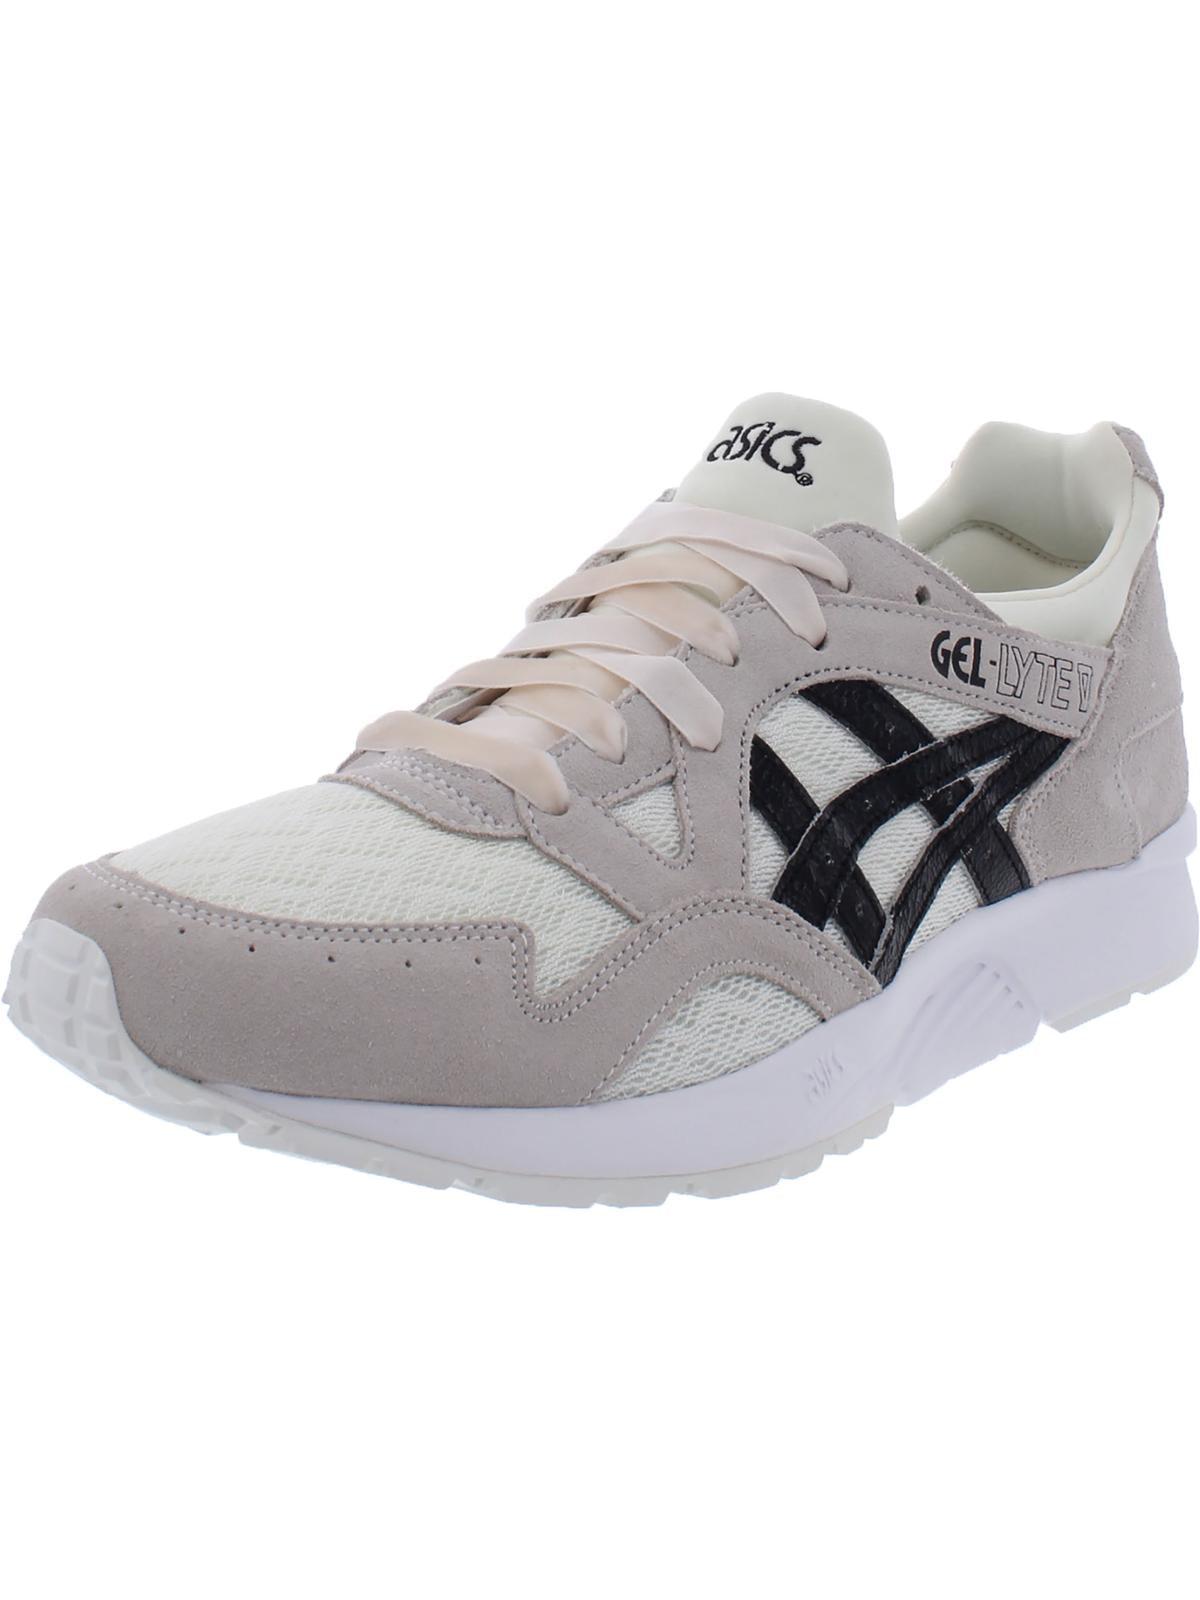 Asics Gel-lyte V Suede Fitness Athletic And Training Shoes in Gray | Lyst